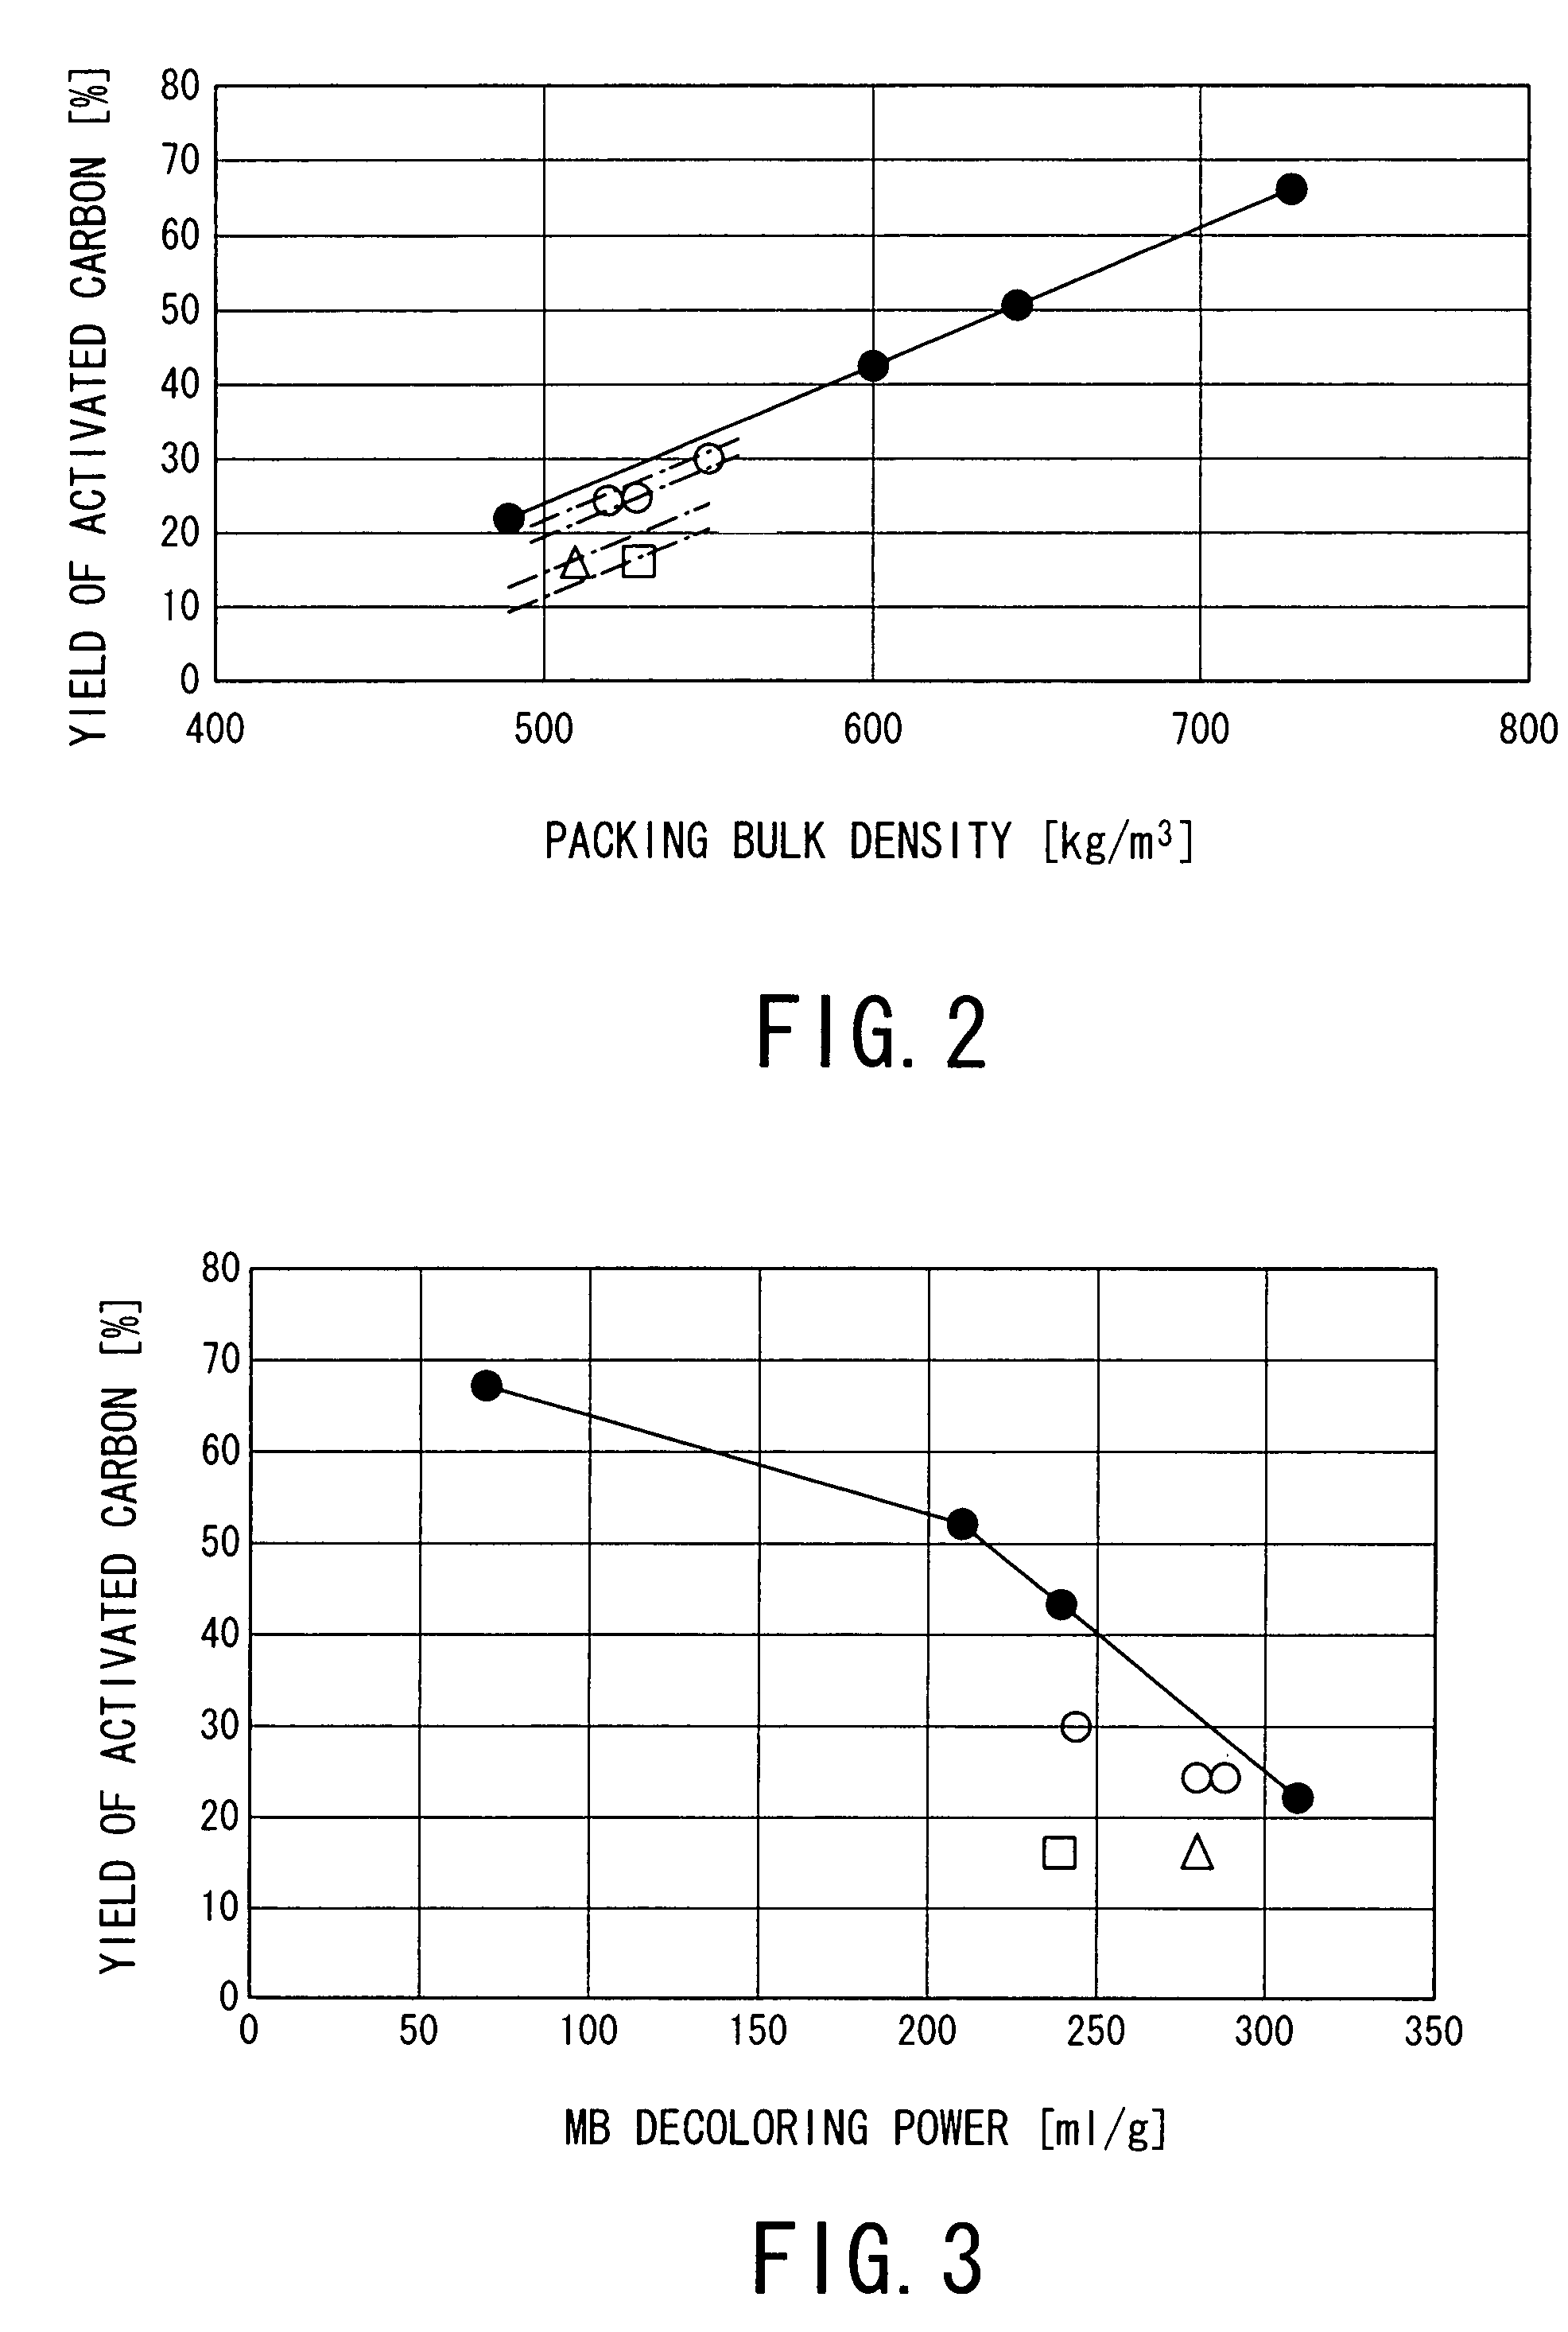 Continuous operation type active charcoal producing apparatus and process